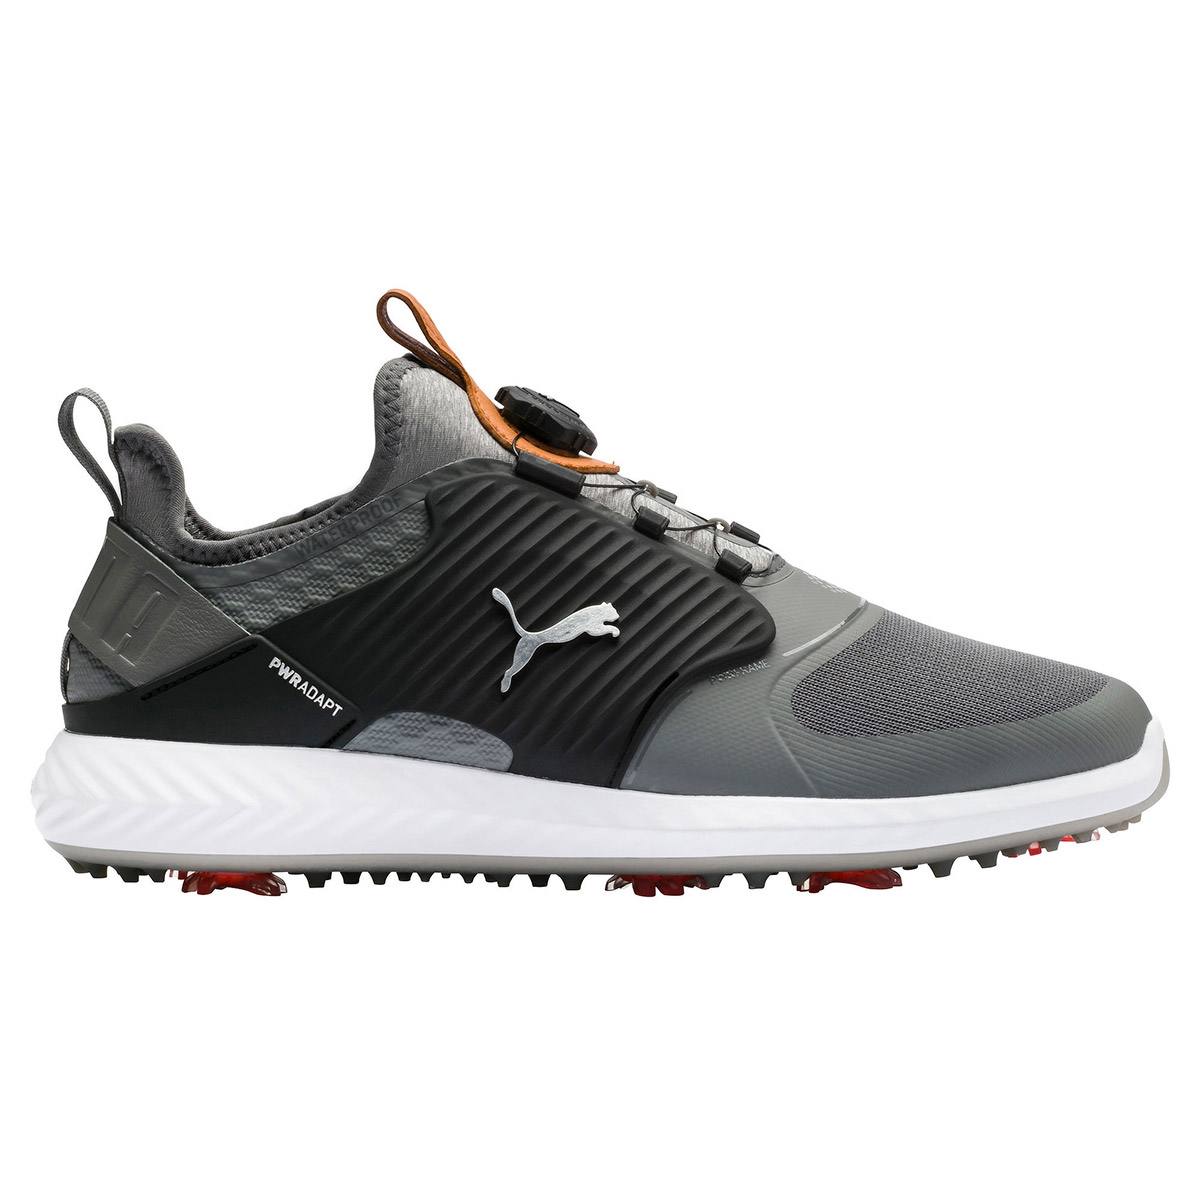 PUMA Golf IGNITE PWRADAPT Cage Disc Shoes from american golf